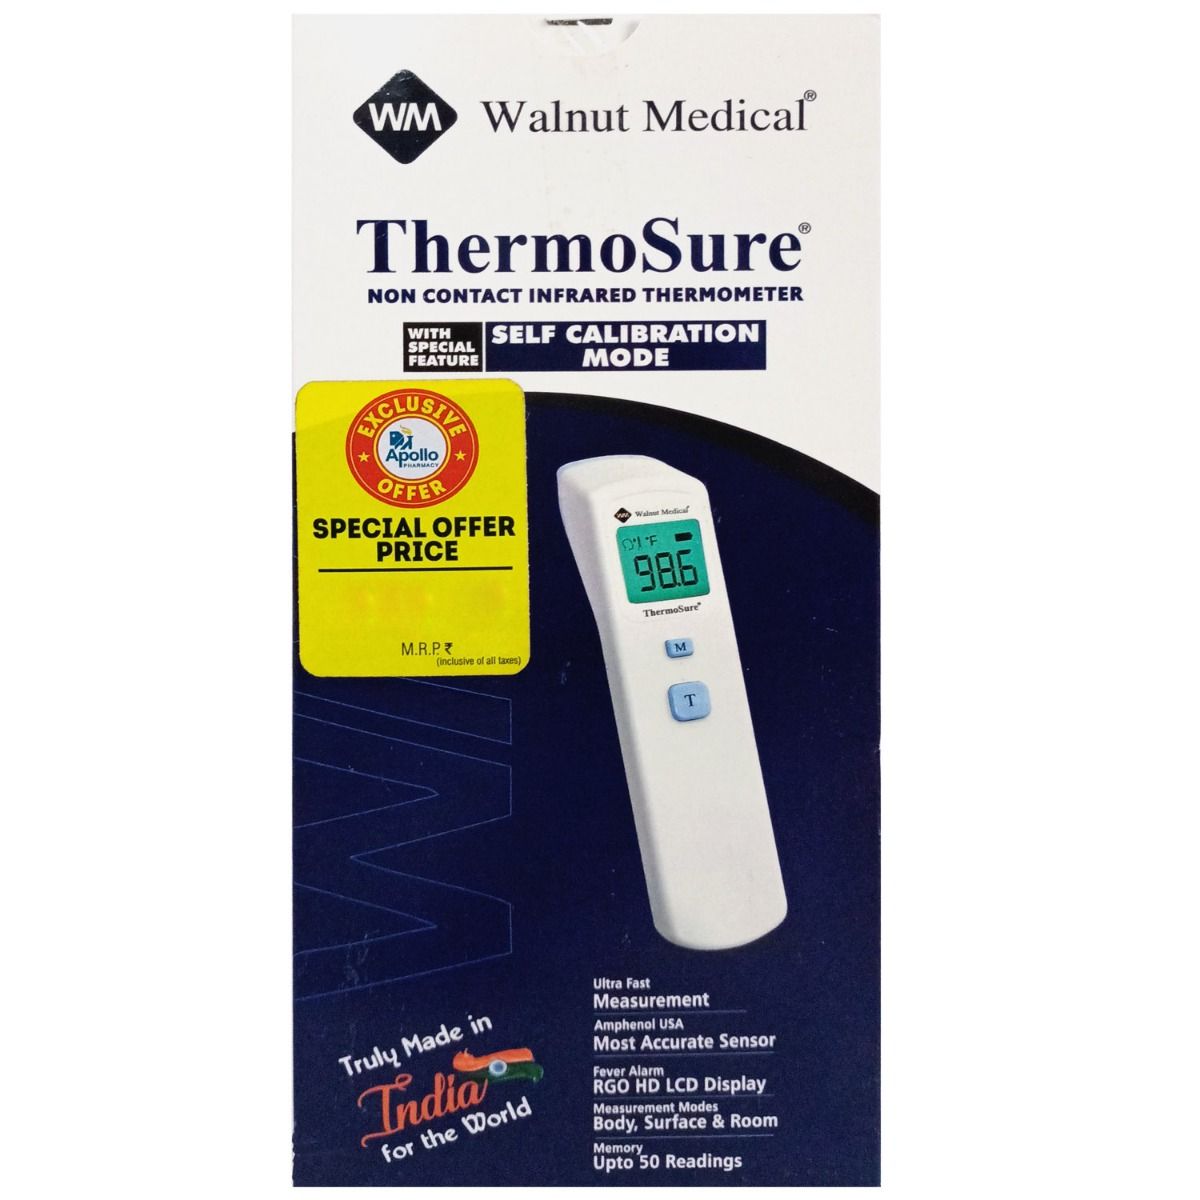 Apollo Life Thermosure Non Contact Infrared Thermometer TS-03, 1 Count, Pack of 1 